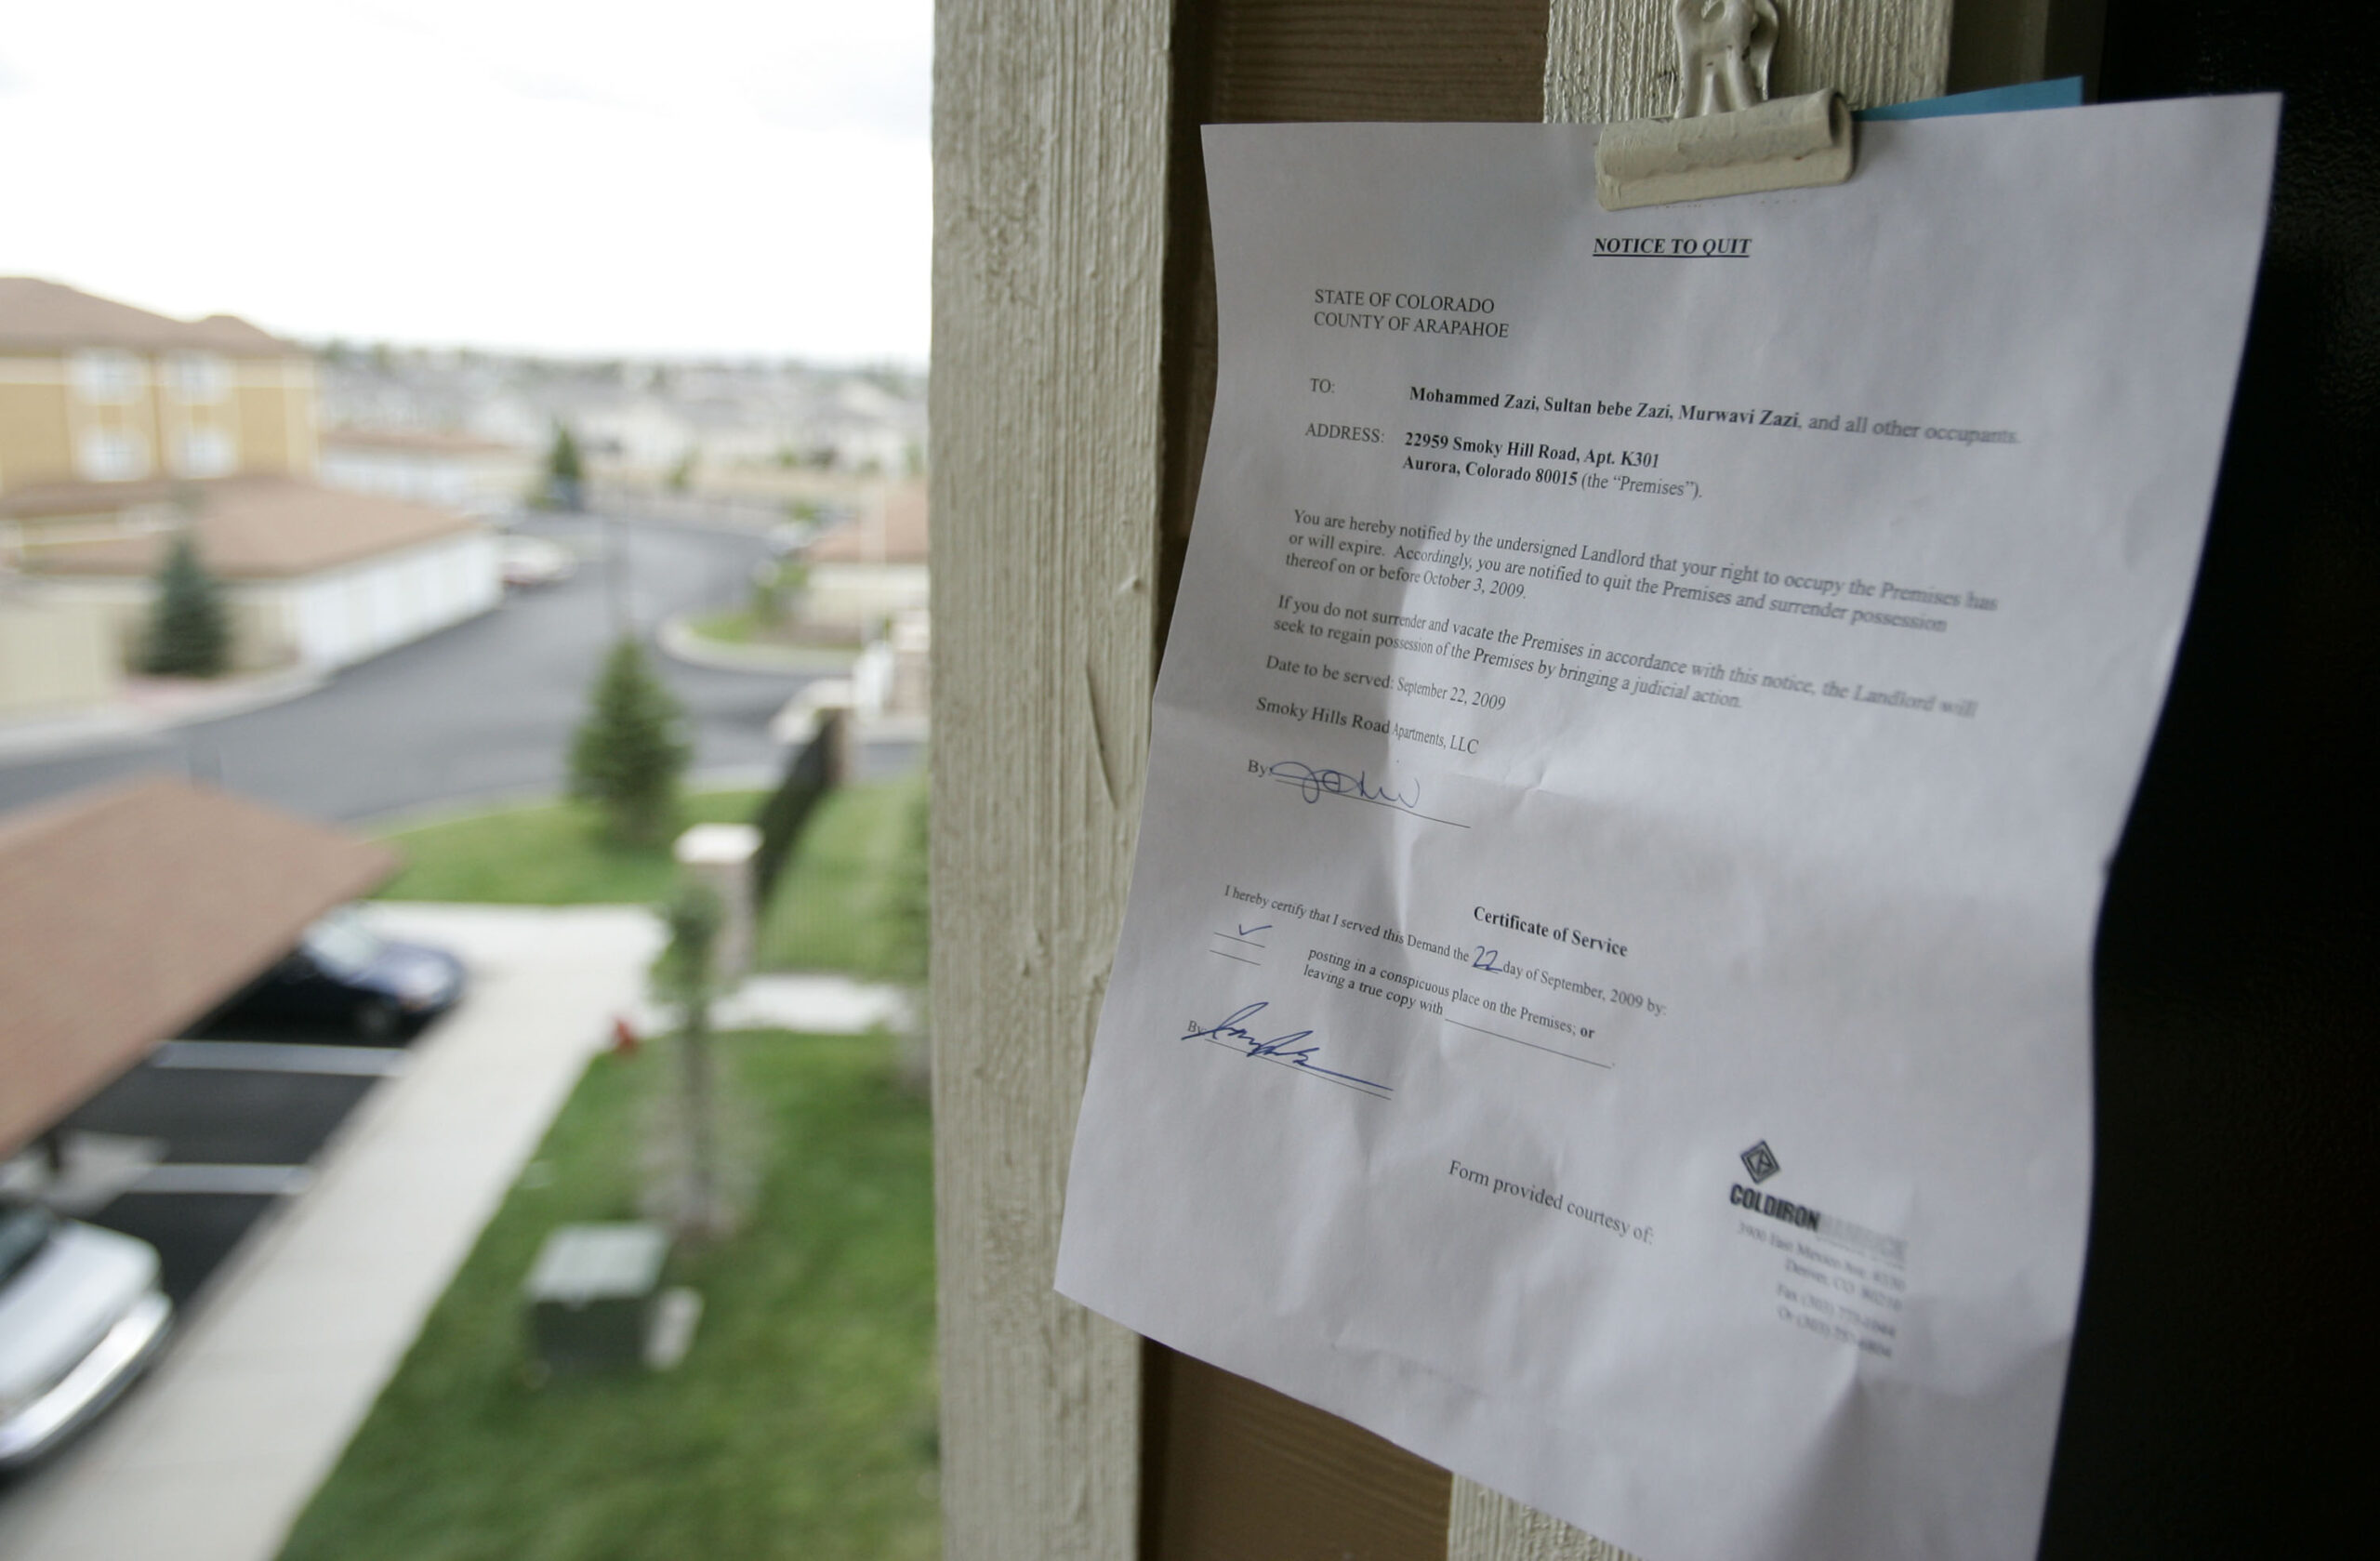 An eviction notice posted on an apartment